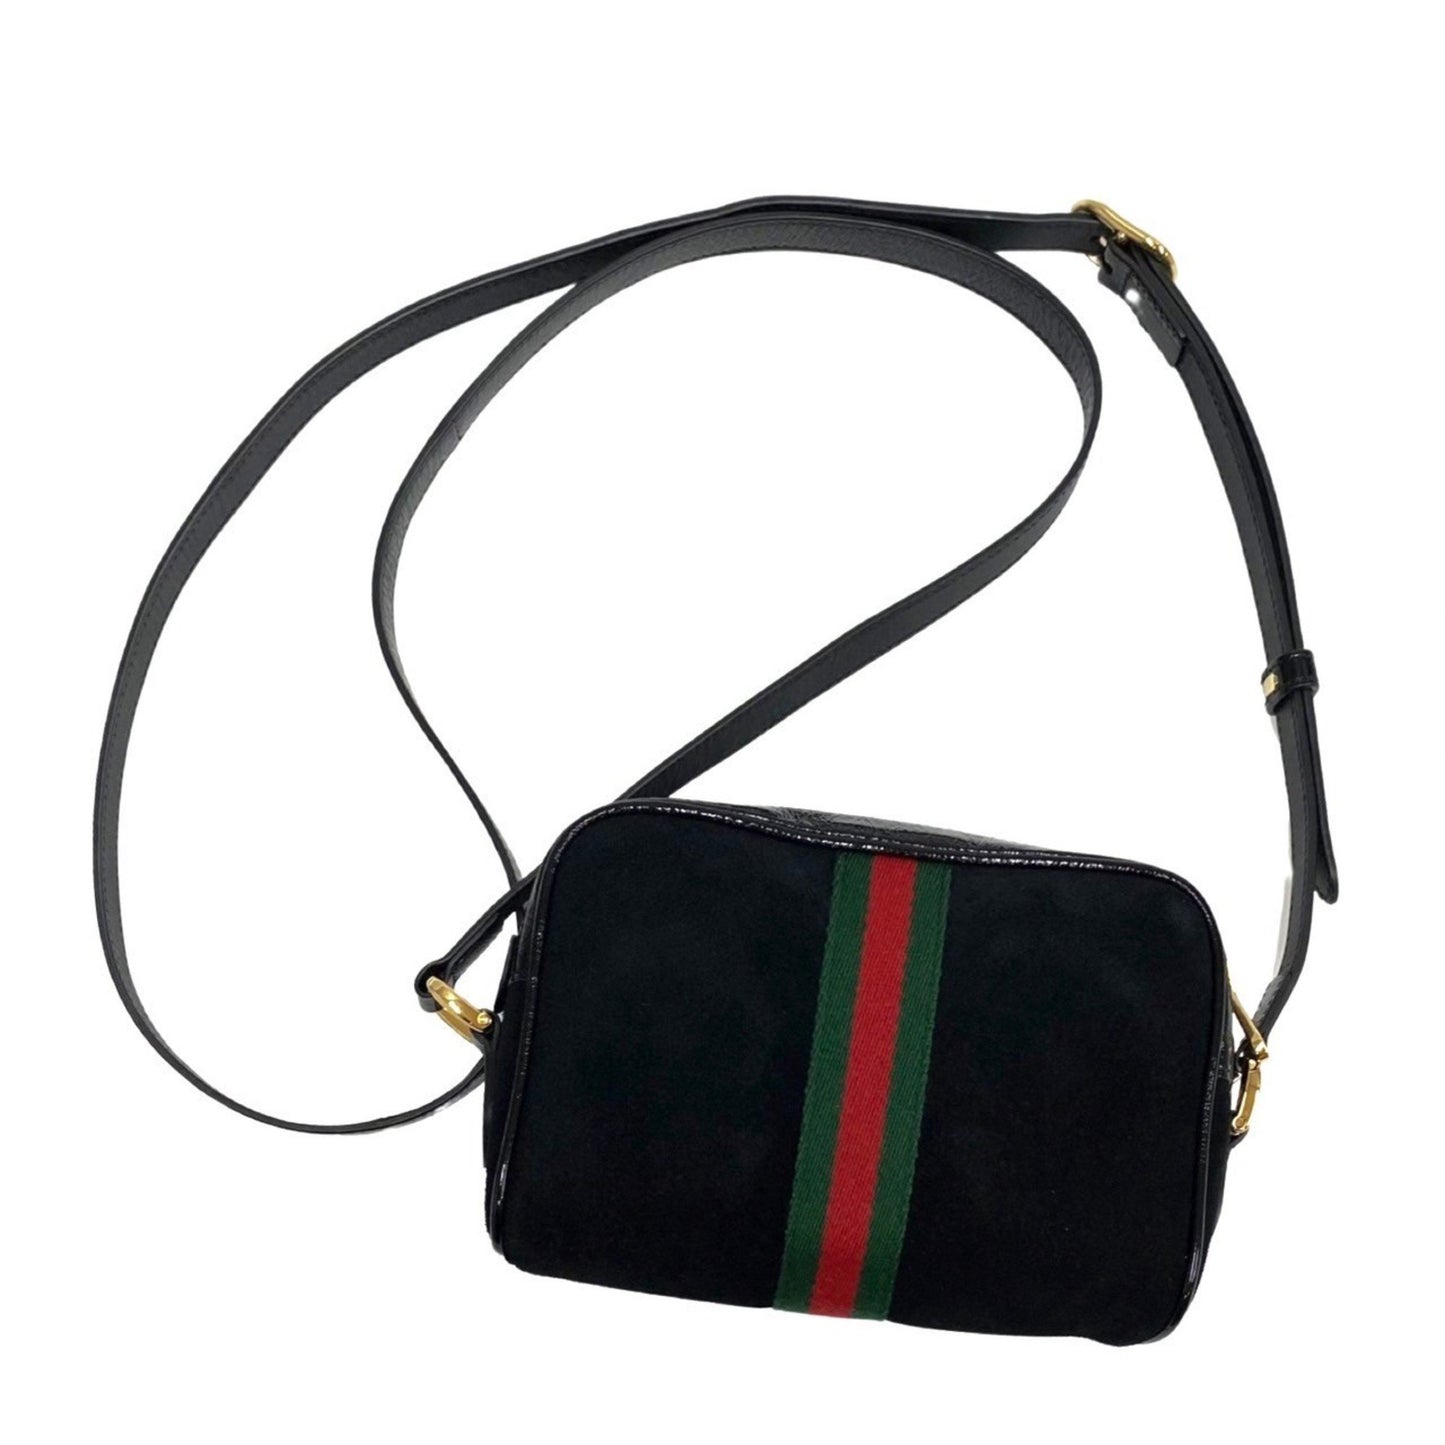 Gucci Women's Leather Convertible Clutch Shoulder Bag in Black